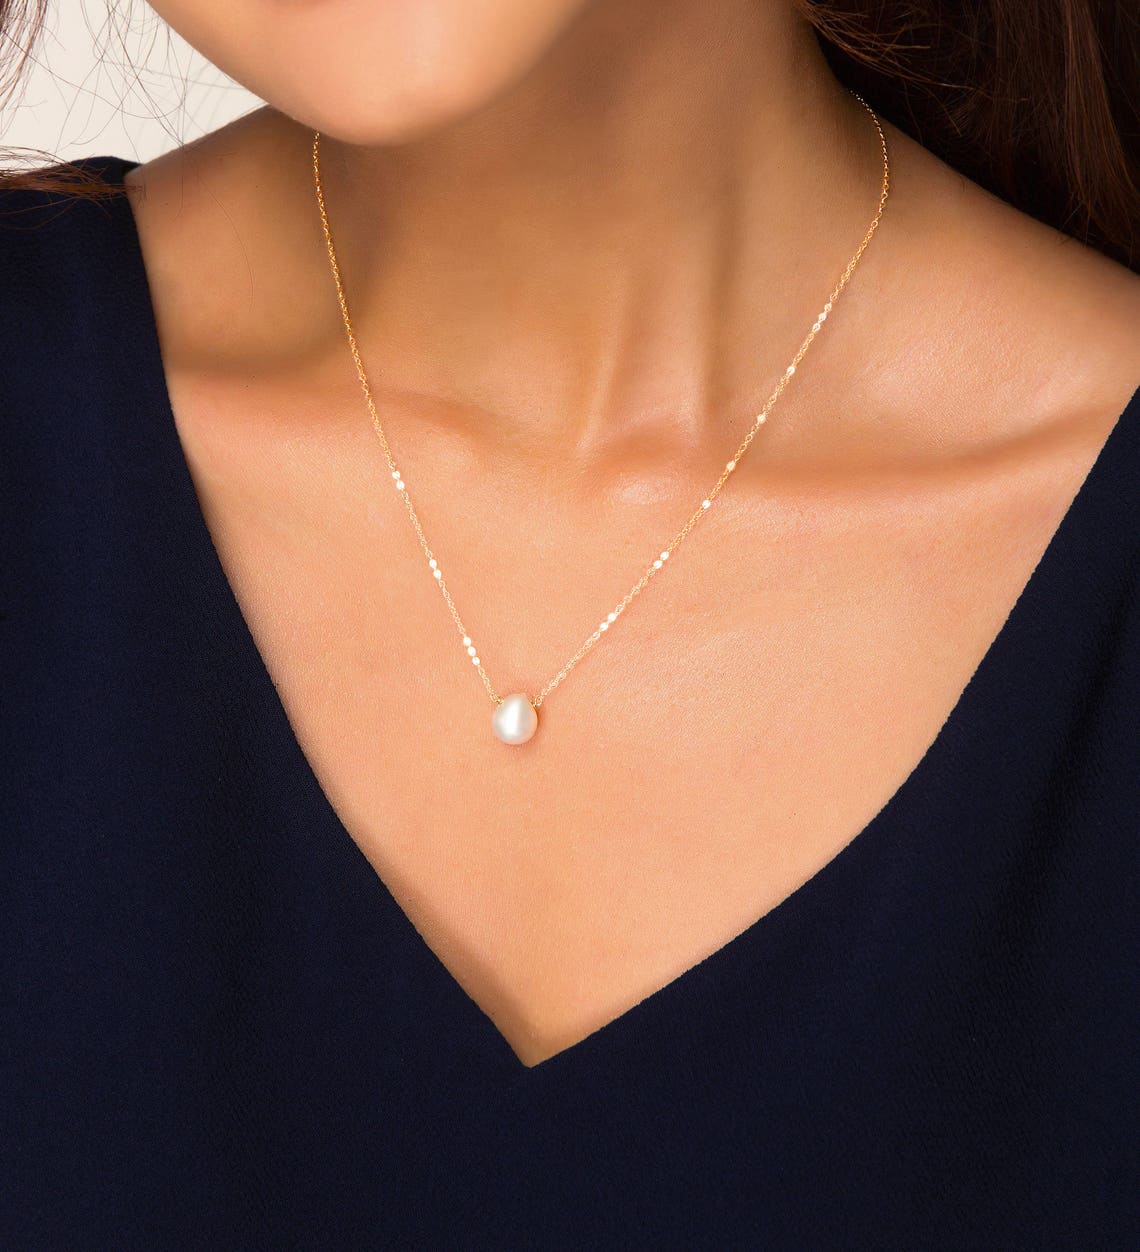 Teardrop Pearl Necklace, Small Pearl Floating Necklace